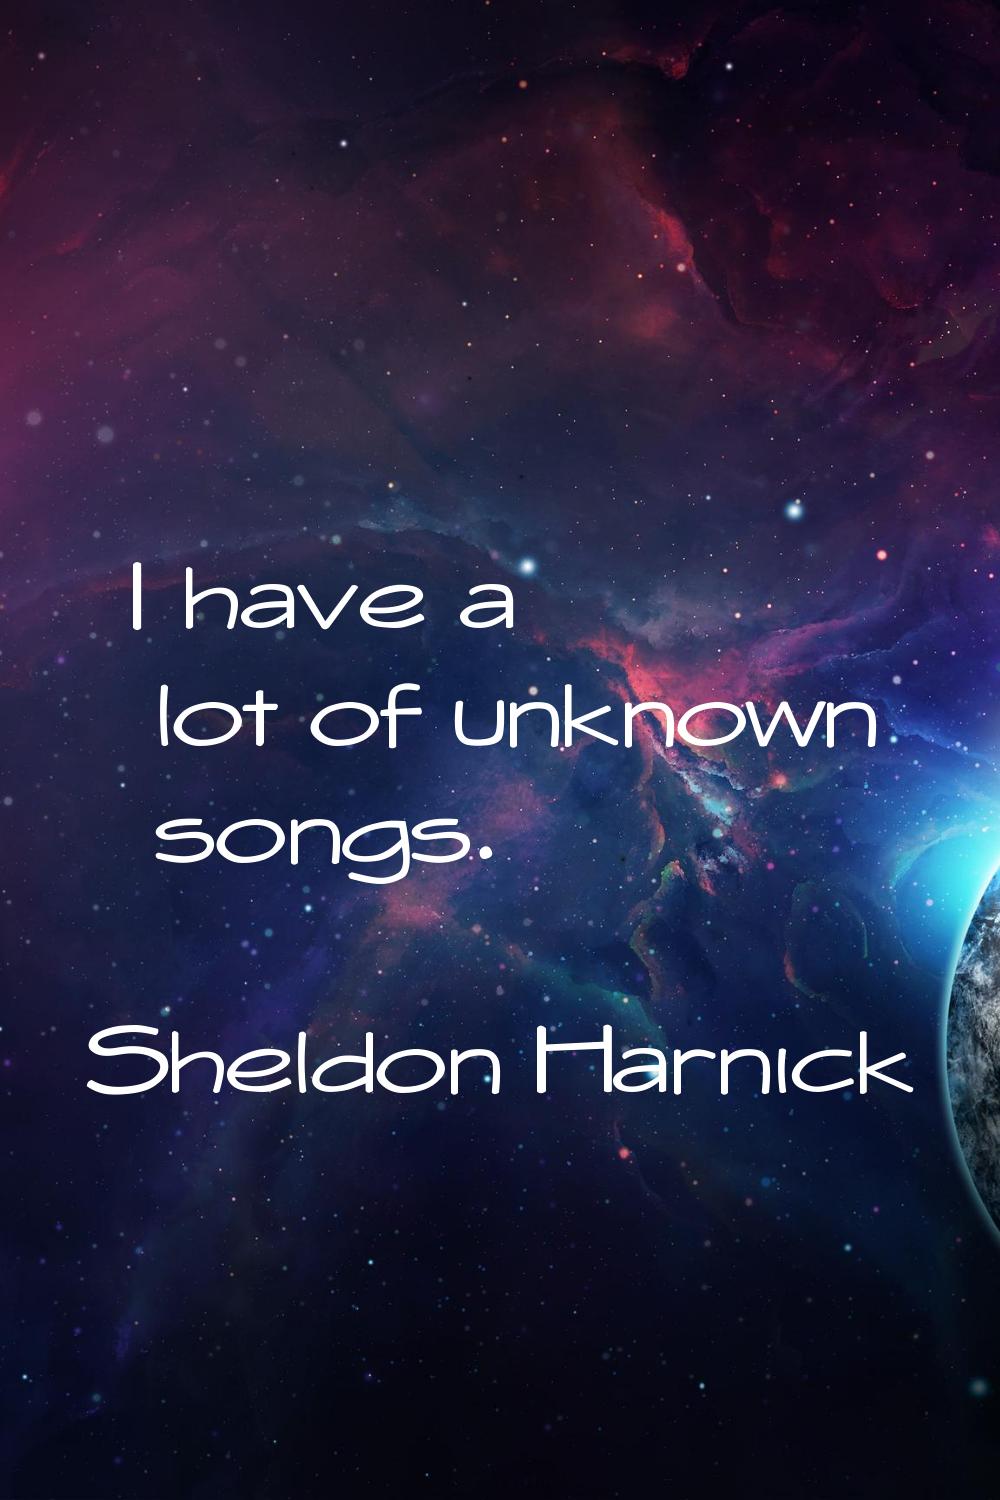 I have a lot of unknown songs.